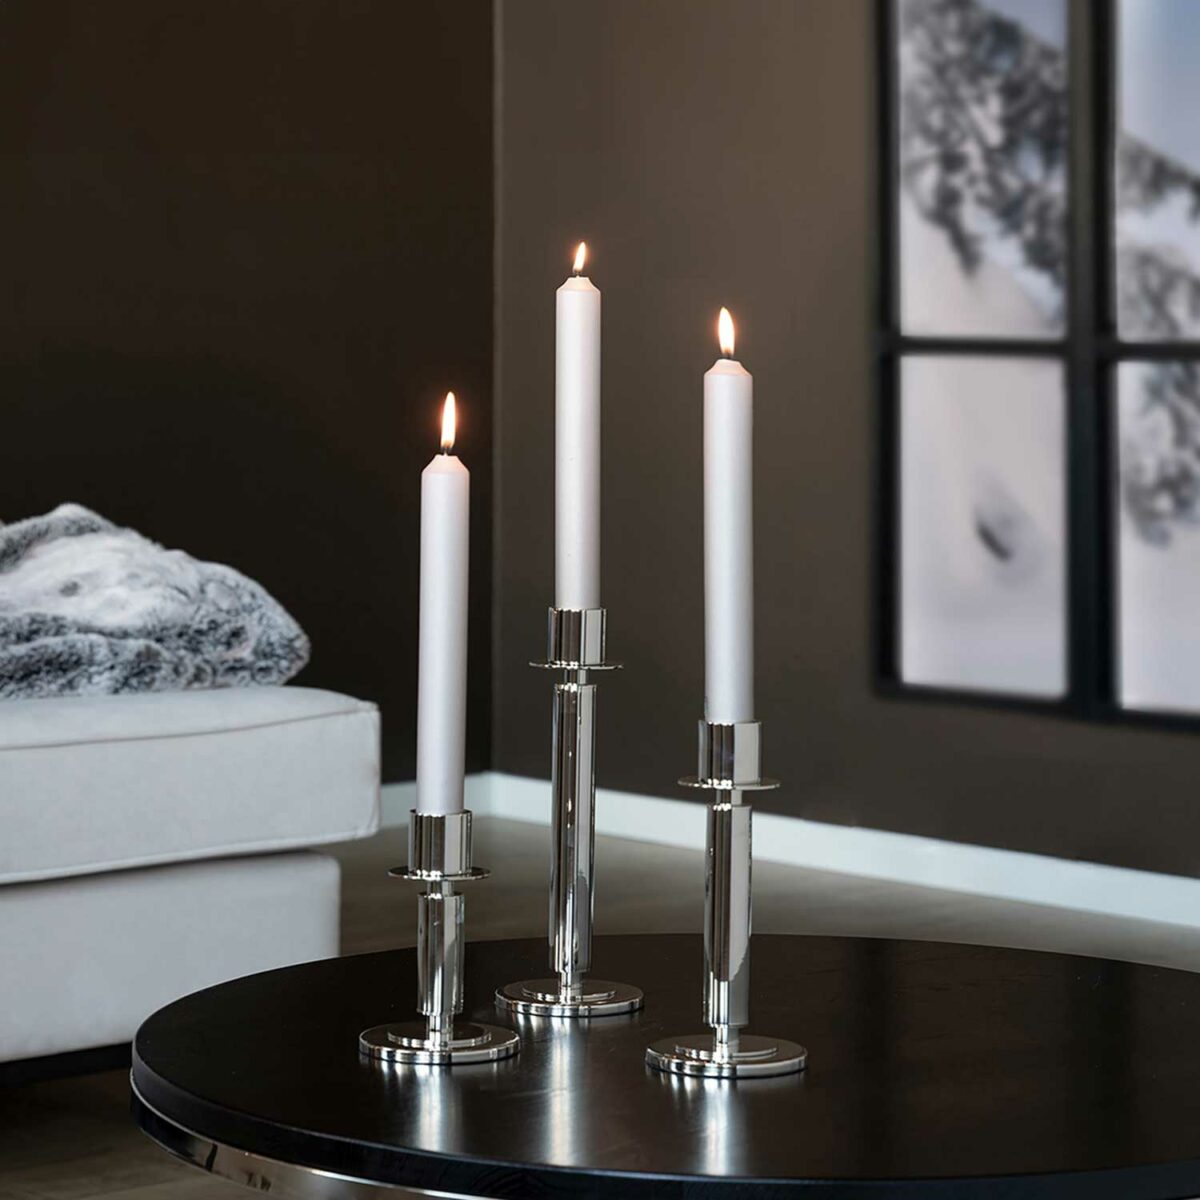 TALIS candlestick in a gift box